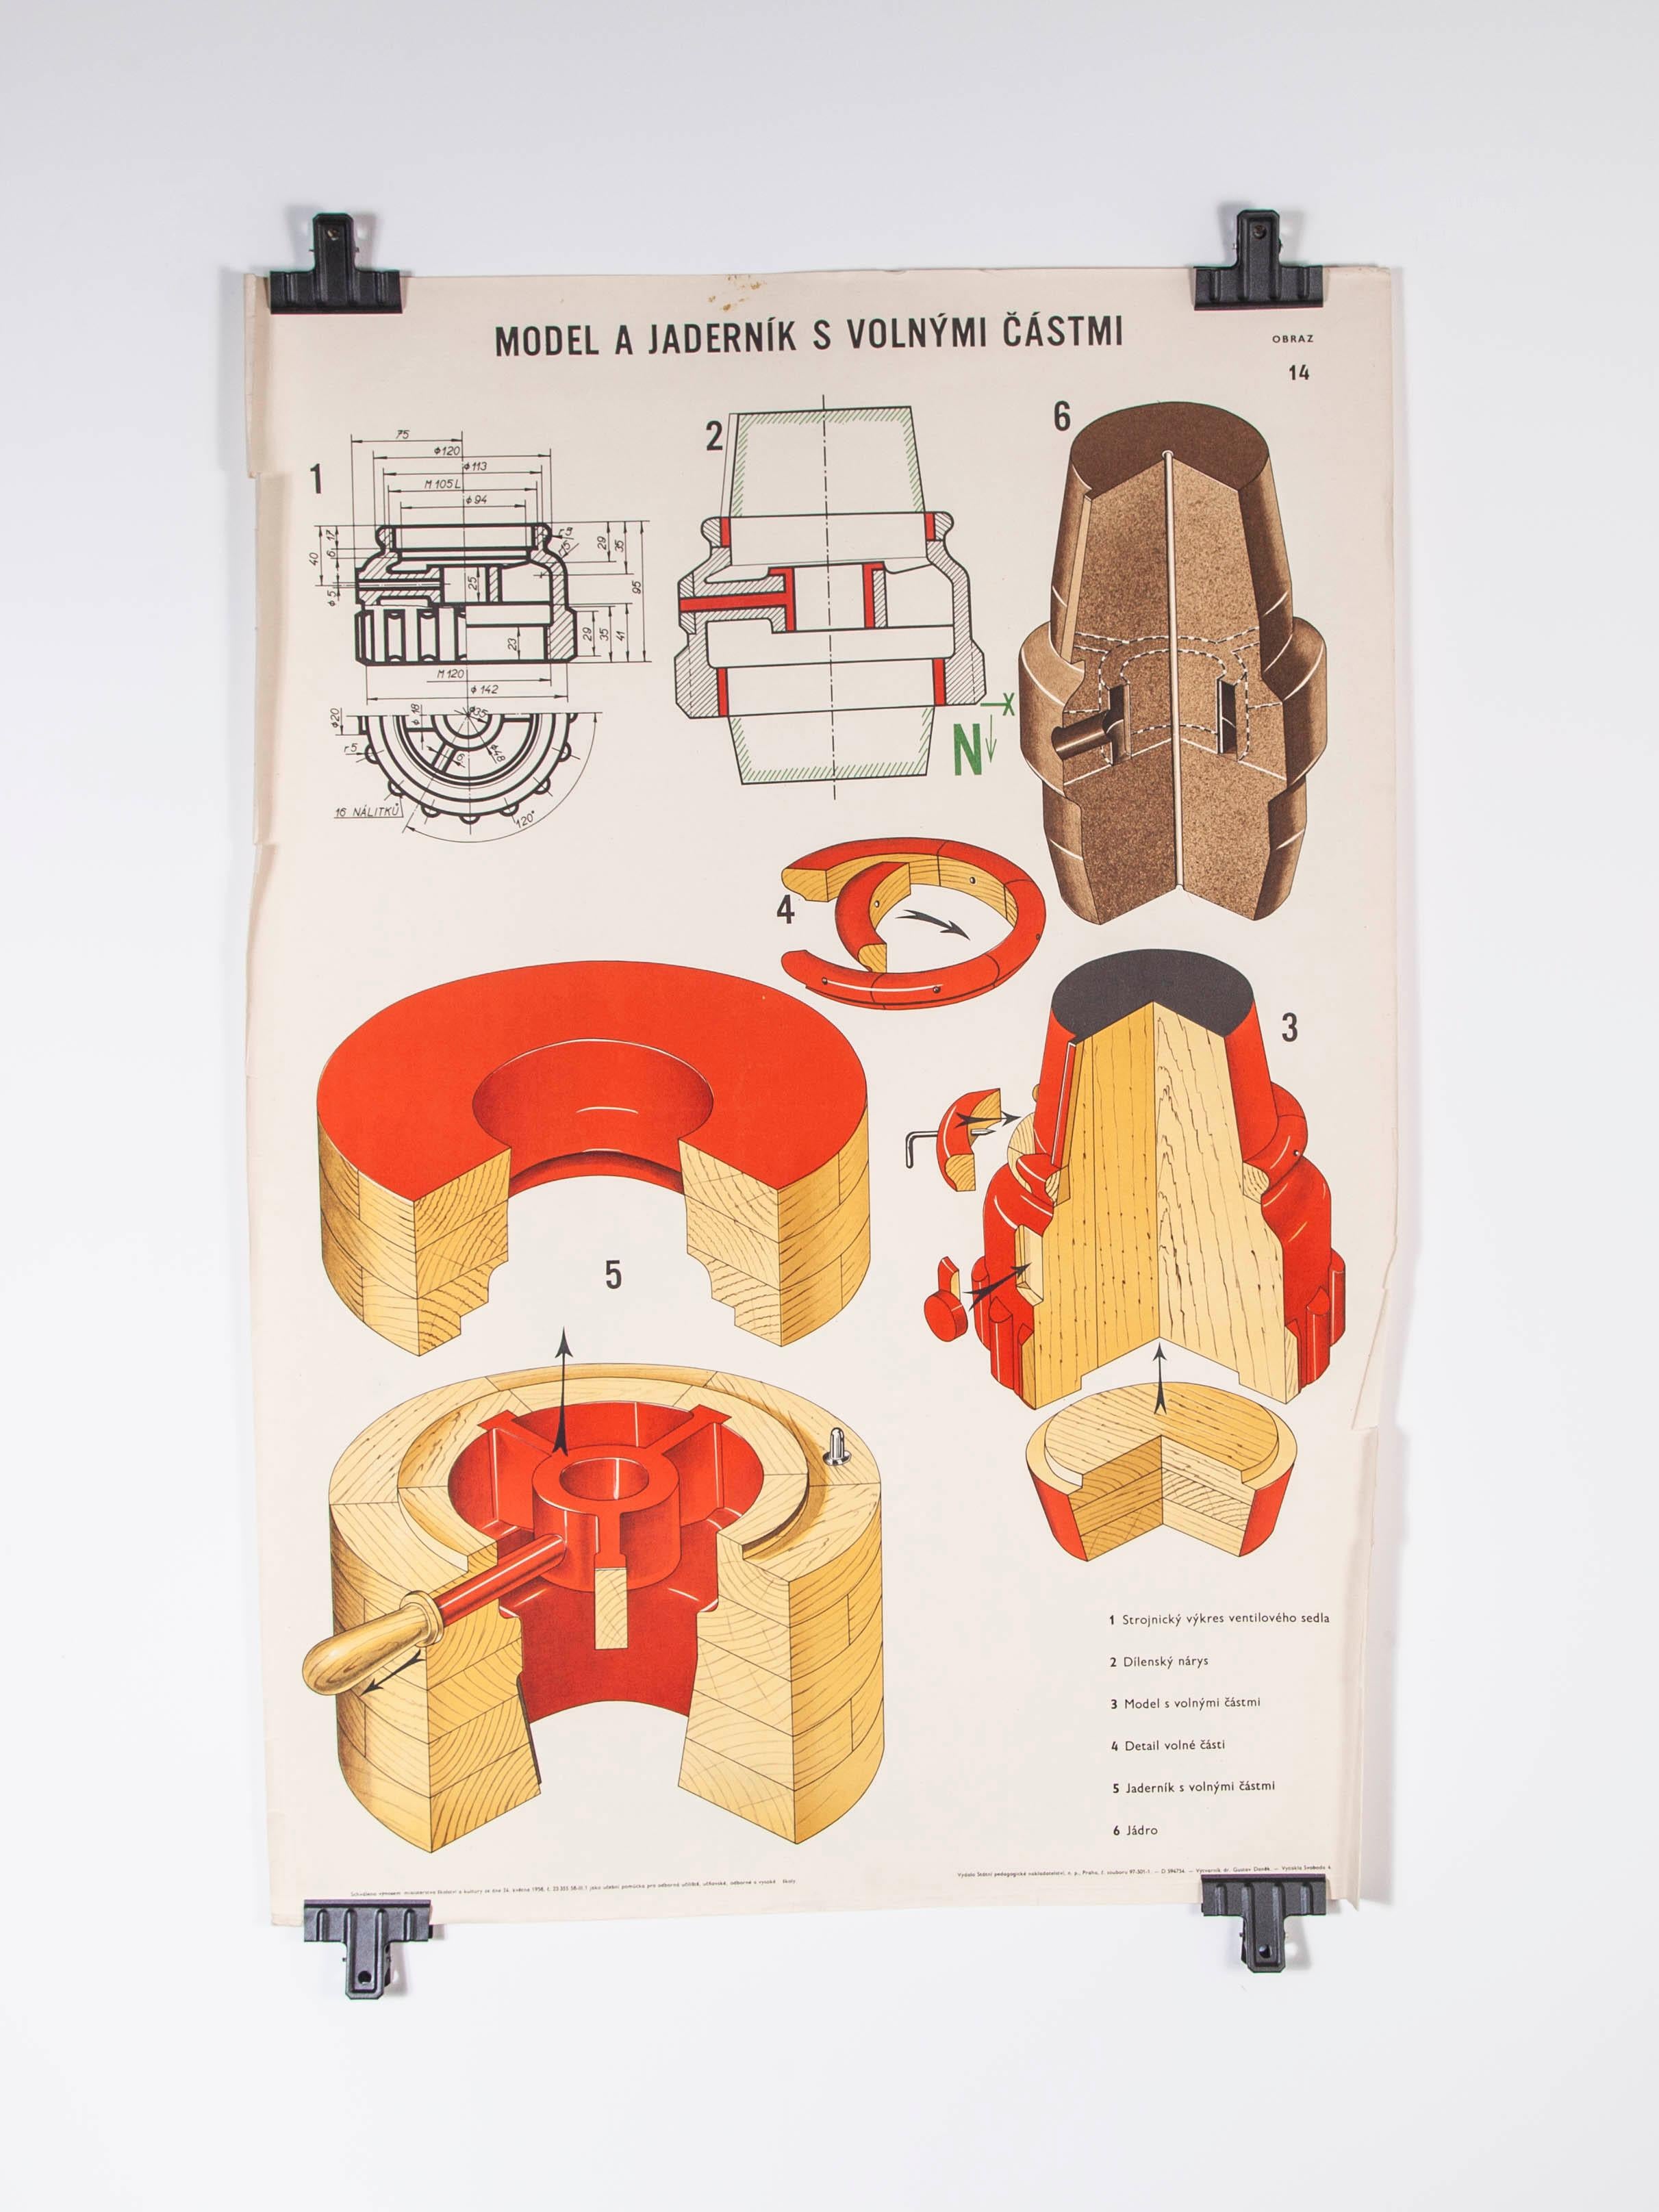 Czech Technical Industrial drawing, foundry mould engineering poster, 13

Sourced from an old engineering workshop in the Czech Republic, an amazing series of technical industrial drawings explaining the process of sand casting and creating the